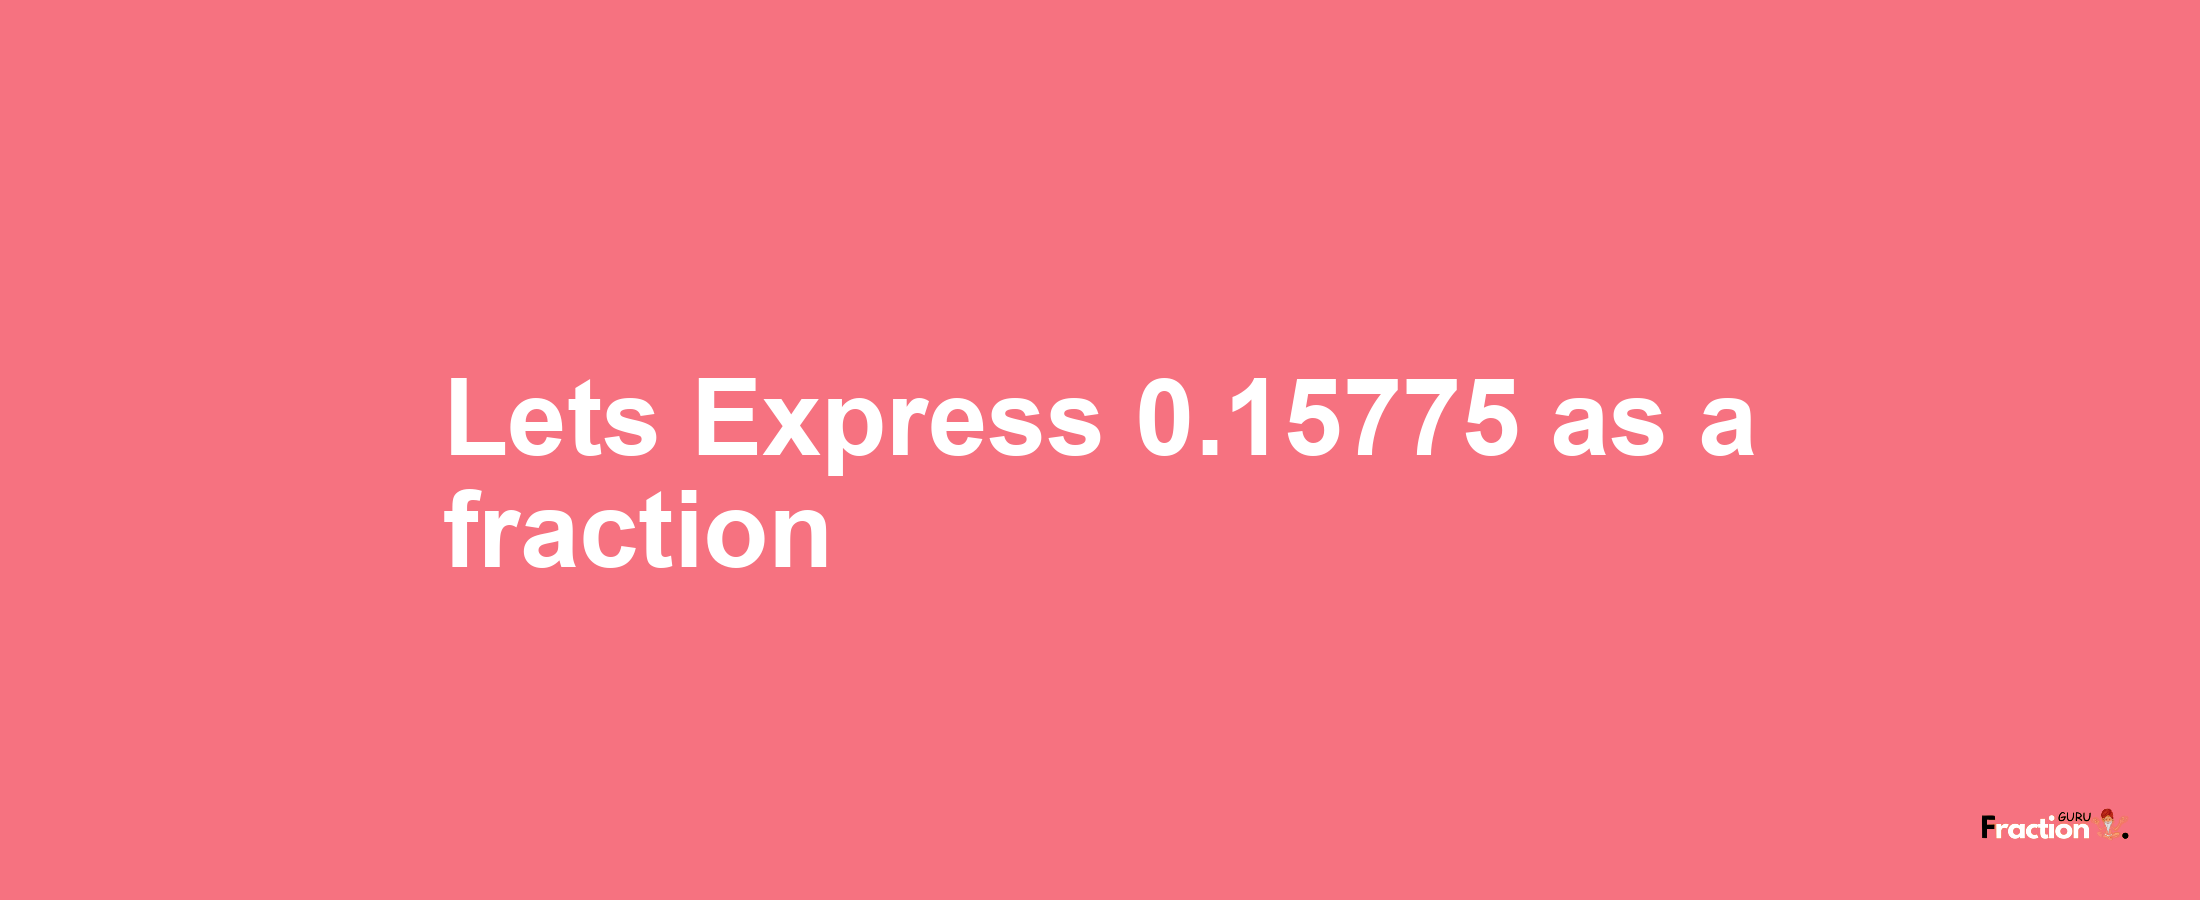 Lets Express 0.15775 as afraction